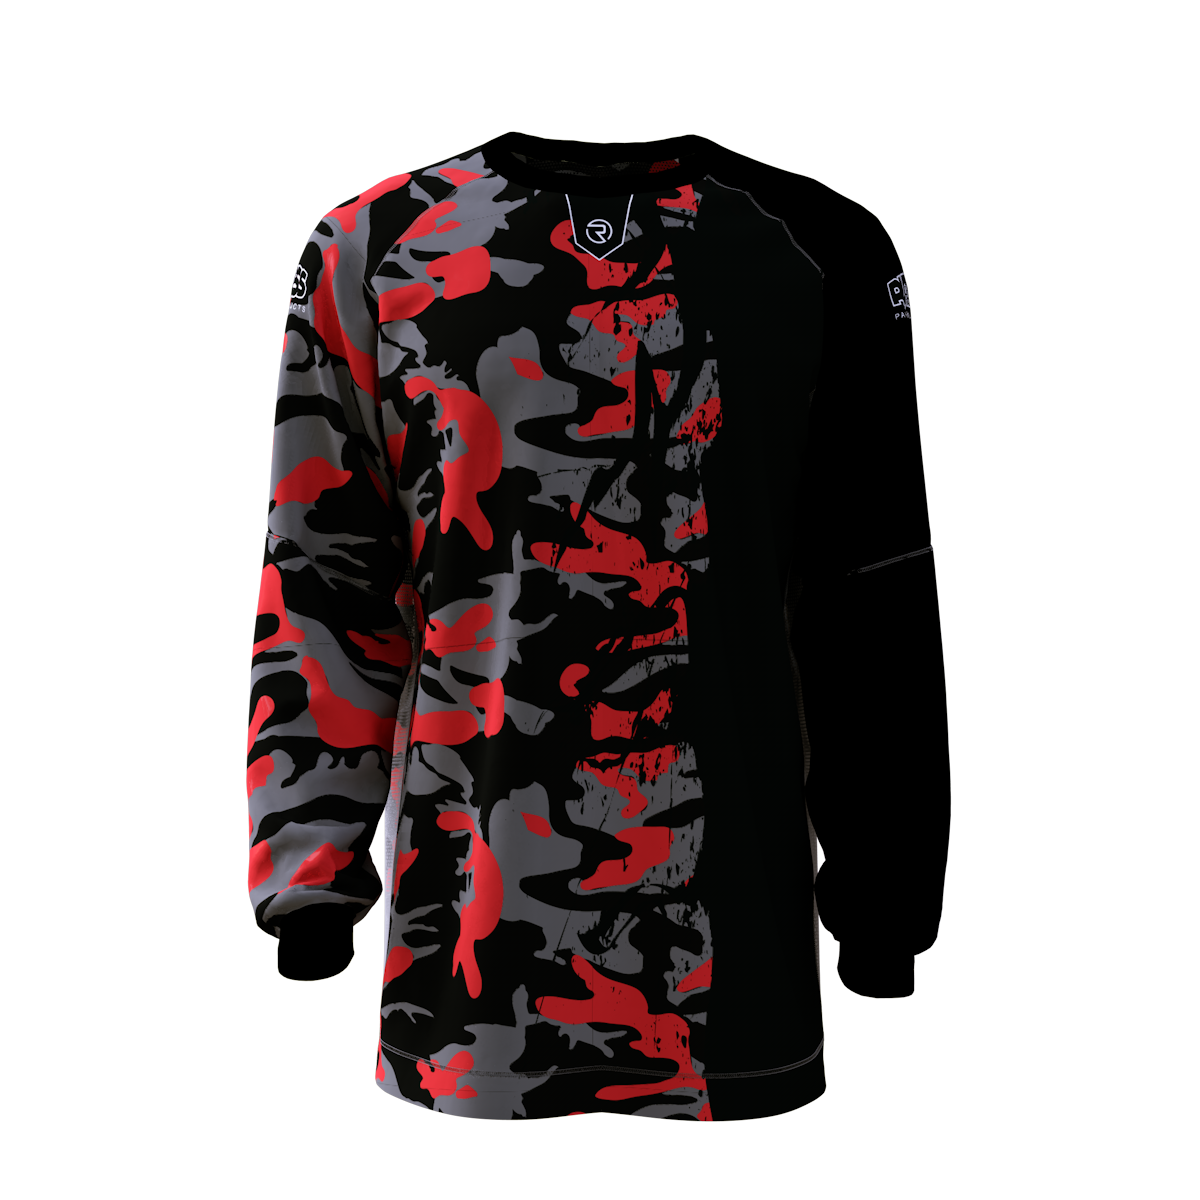 Half Drip Breeze Jersey - Ruthless Paintball Products